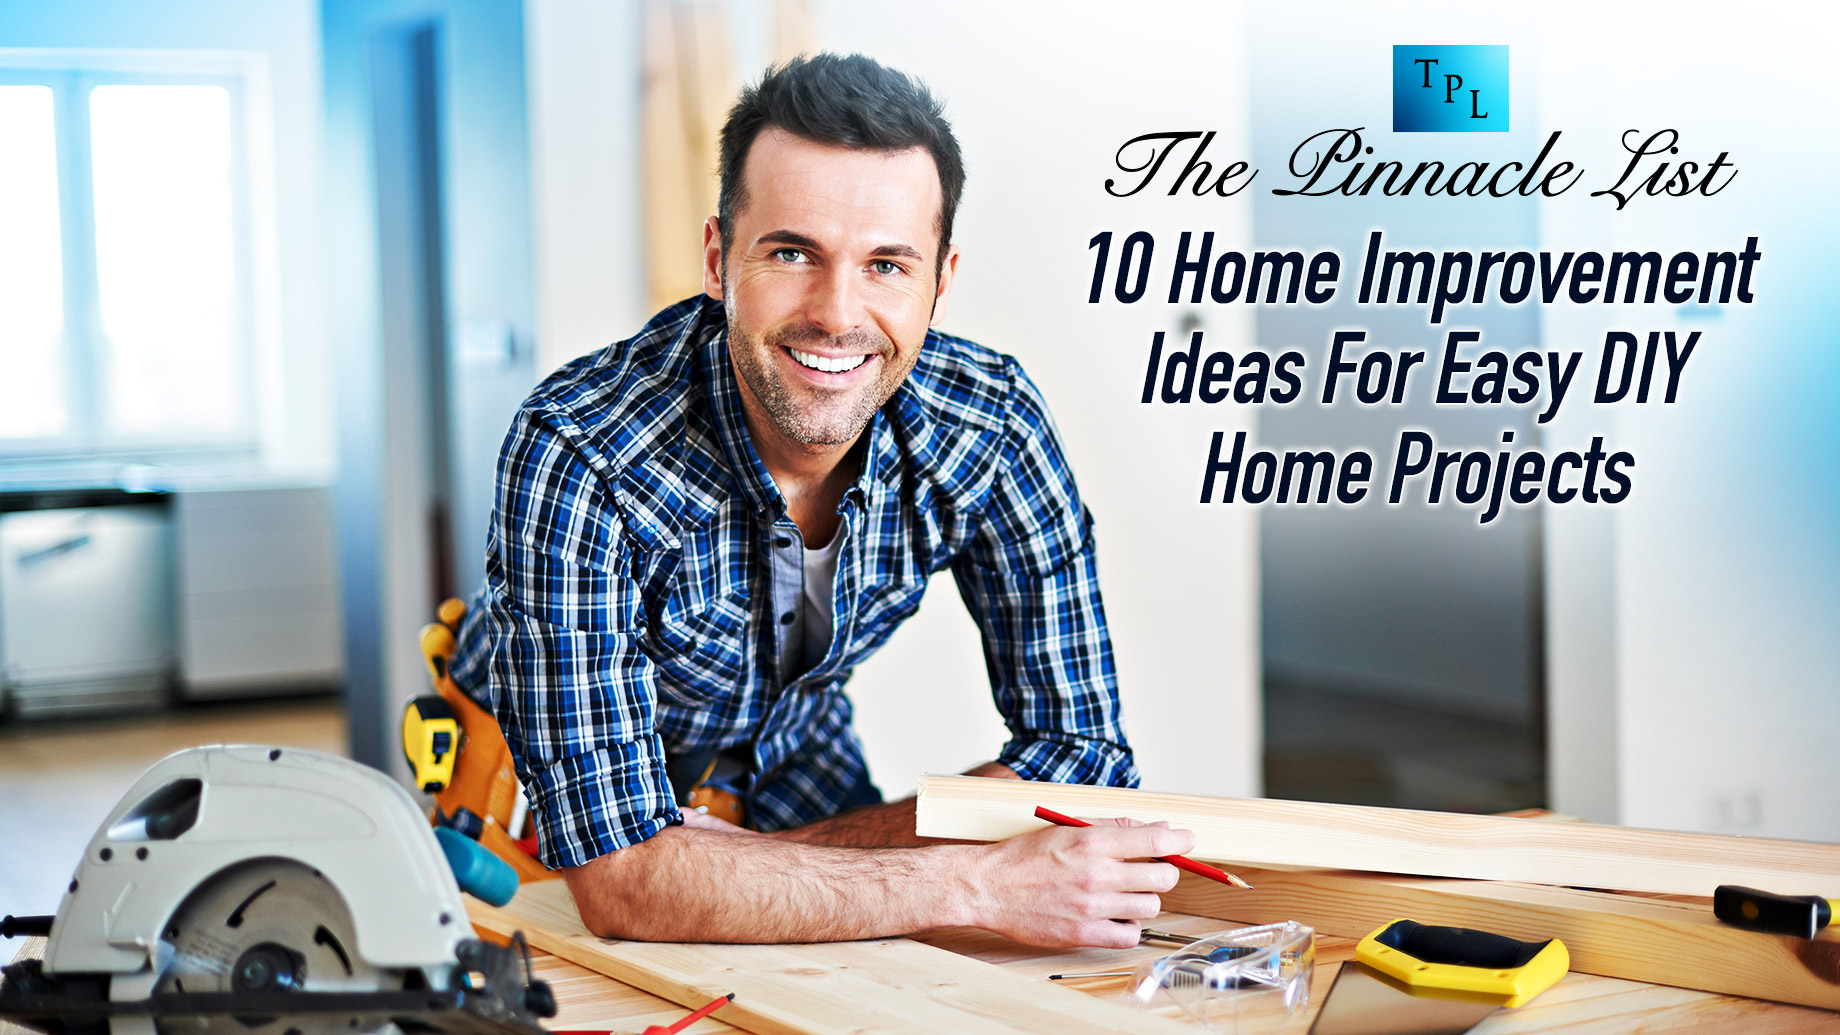 10 Home Improvement Ideas For Easy DIY Home Projects